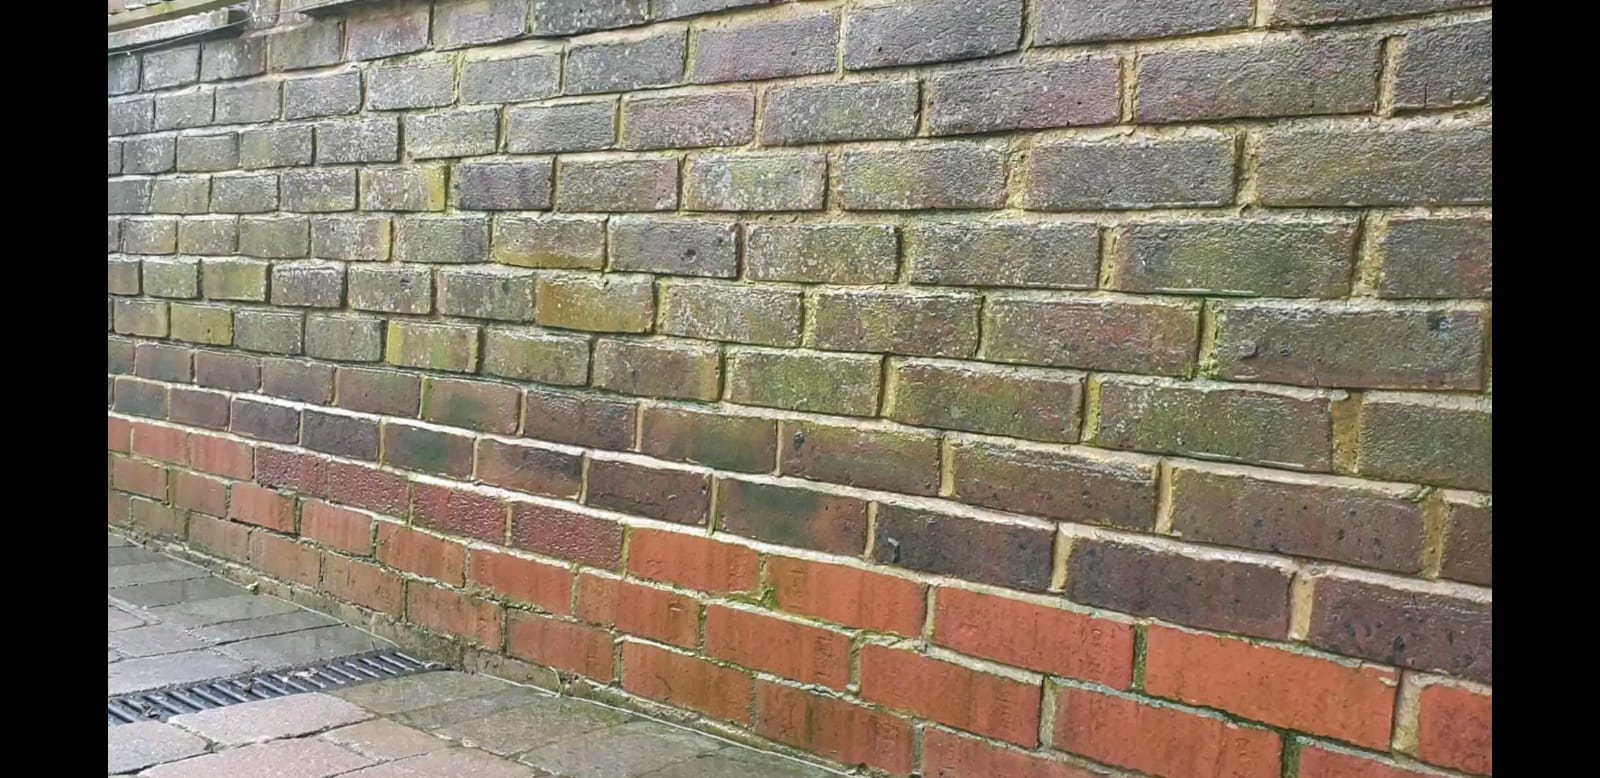 Algae growing on brick wall which will cause damage to brickwork